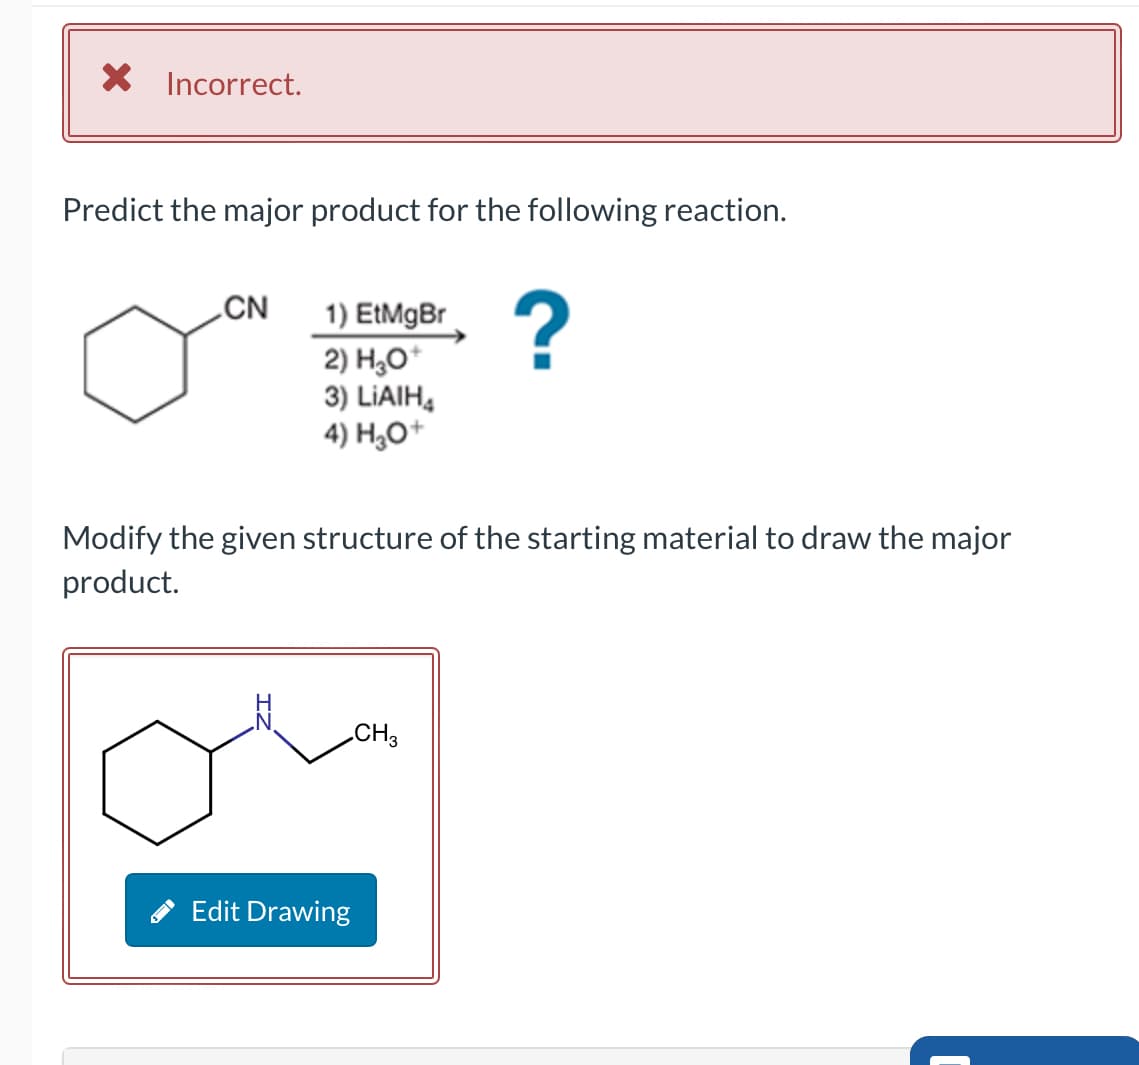 × Incorrect.
Predict the major product for the following reaction.
CN
1) EtMgBr
2) H3O+
?
3) LiAlH4
4) H3O+
Modify the given structure of the starting material to draw the major
product.
Edit Drawing
CH3